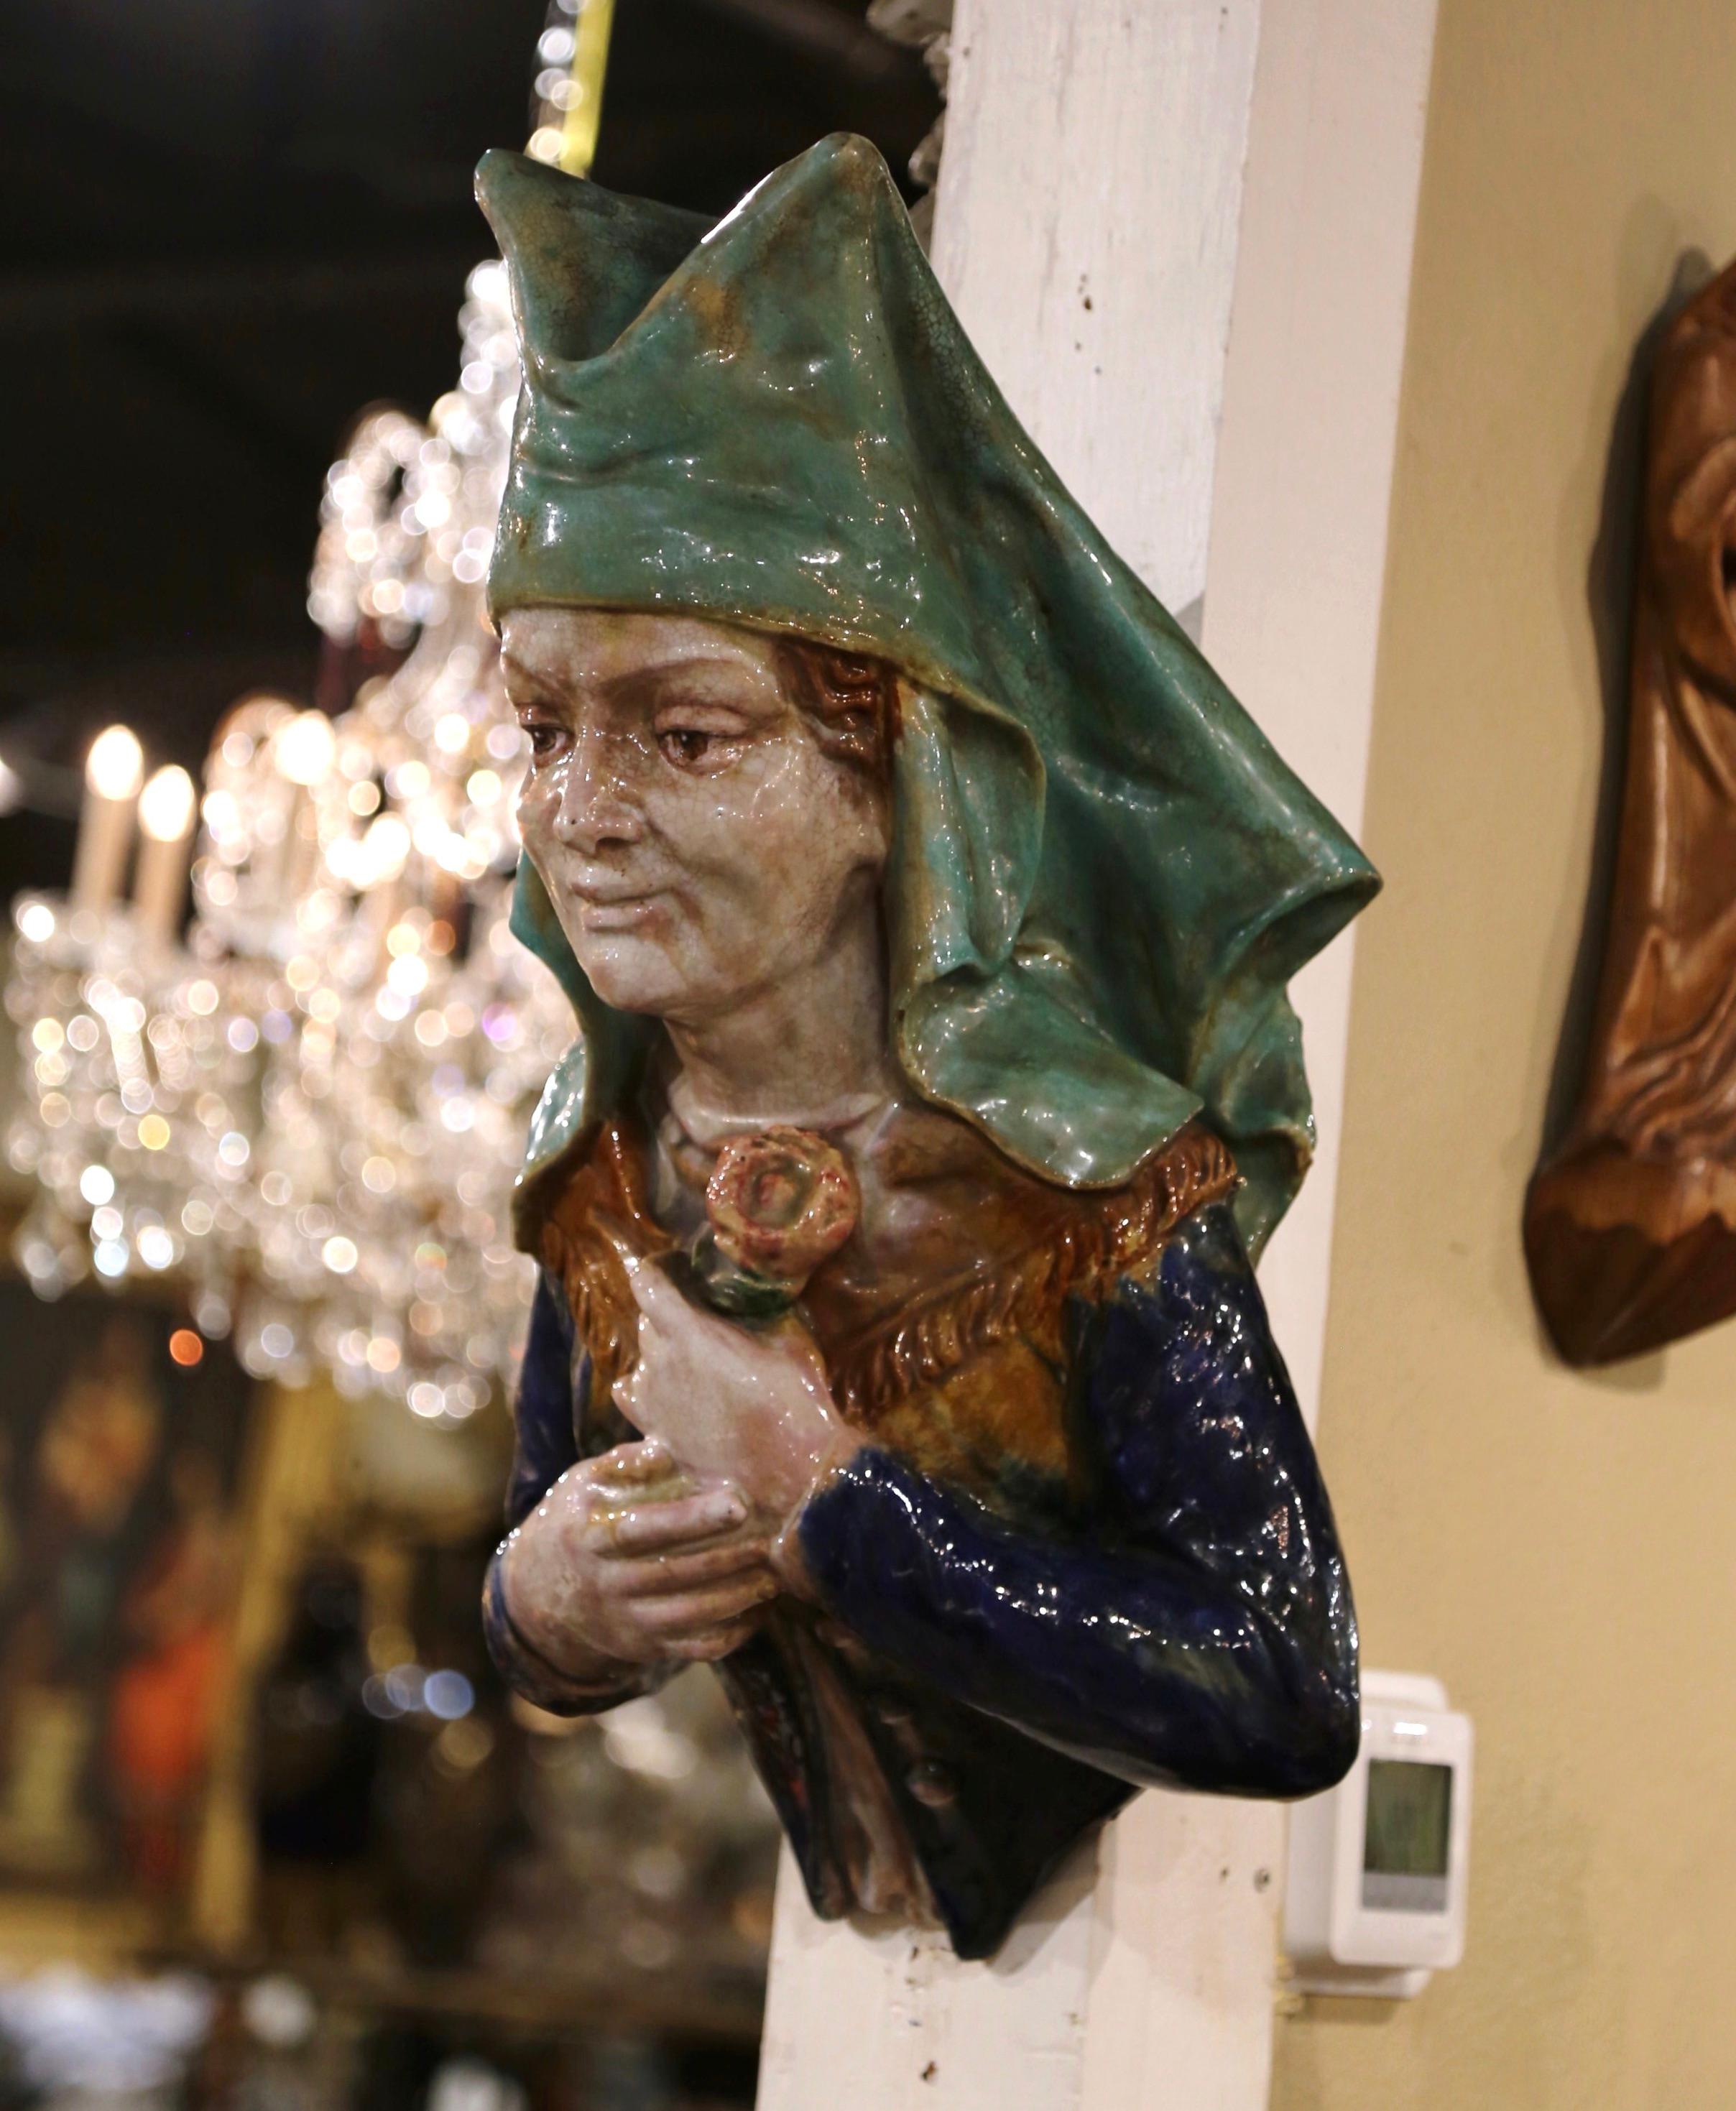 This beautiful bust would make any wall interesting and unique, adding a touch of feminine, old-world charm. Crafted in southern France circa 1880, the large antique wall-hanging statue depicts an older woman dressed in a blue top with brass-colored